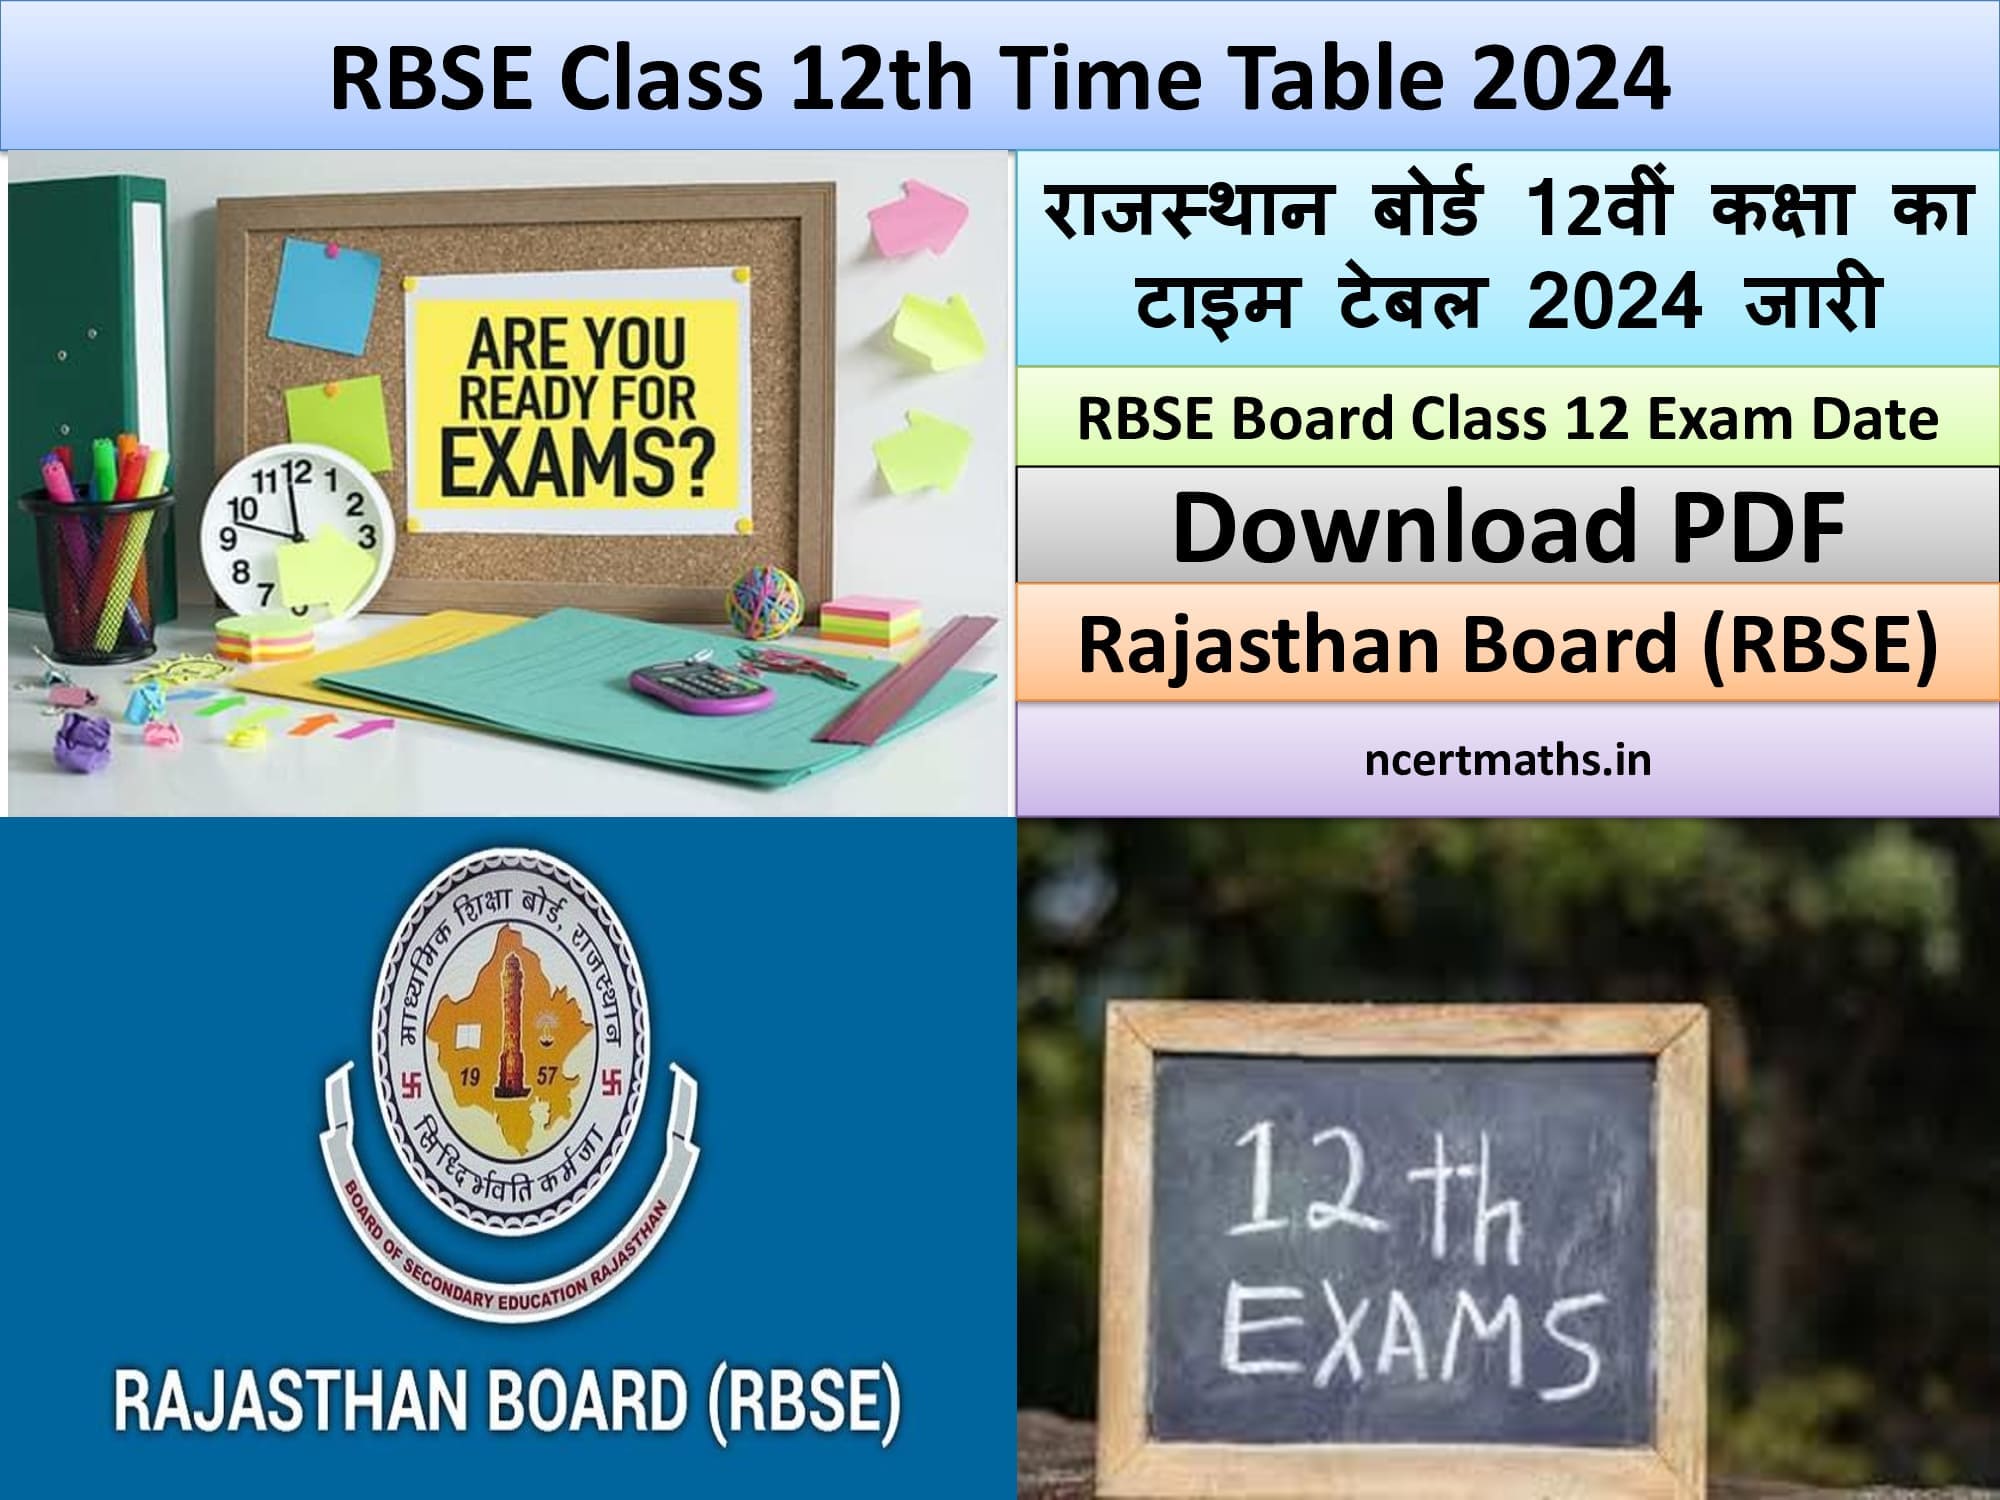 RBSE Class 12th Time Table 2024